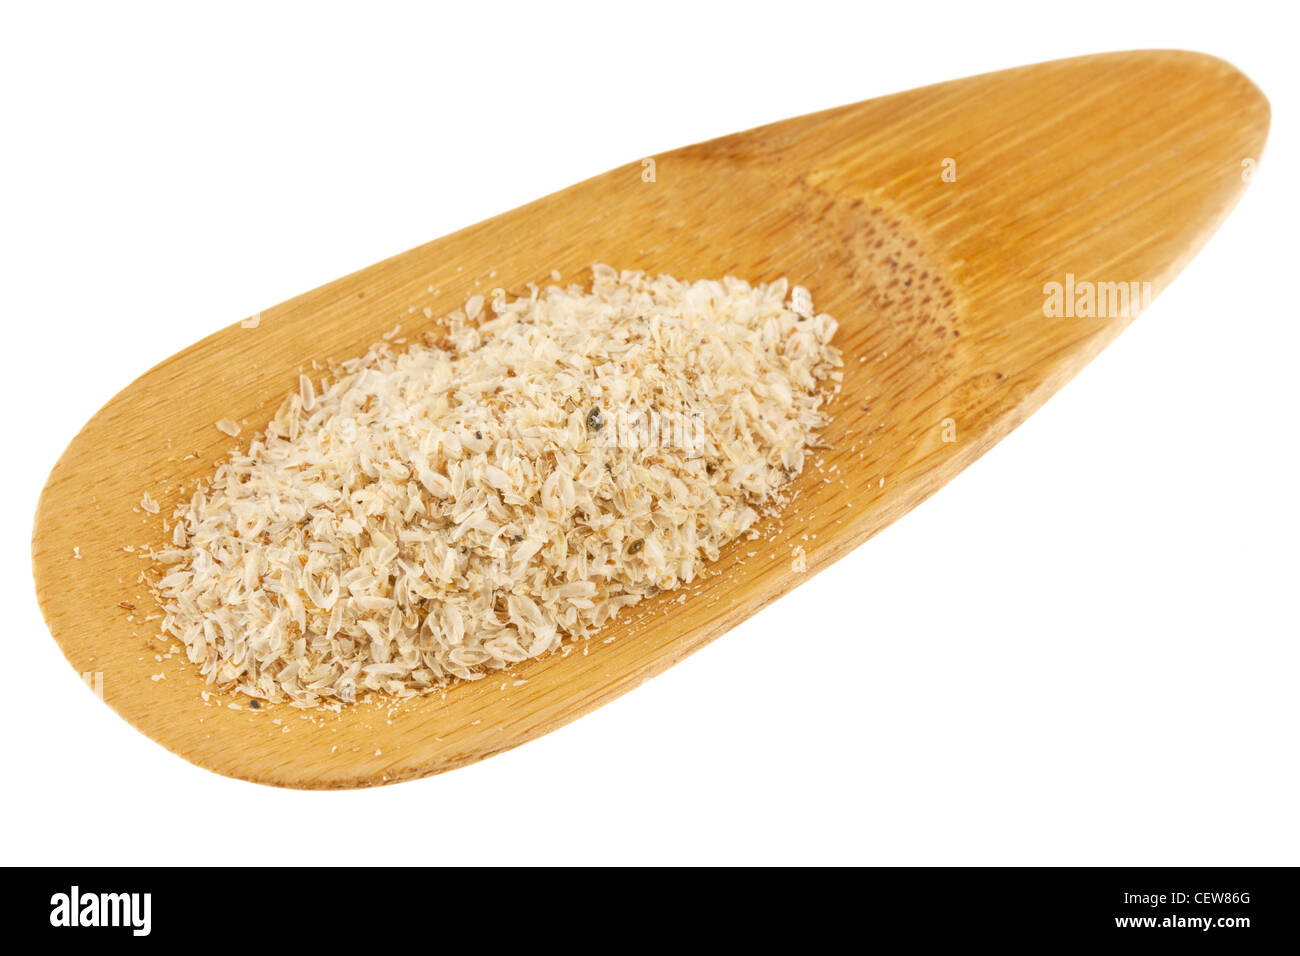 psyllium seed husks - dietary supplement, source of soluble fiber, on a small bamboo scoop Stock Photo